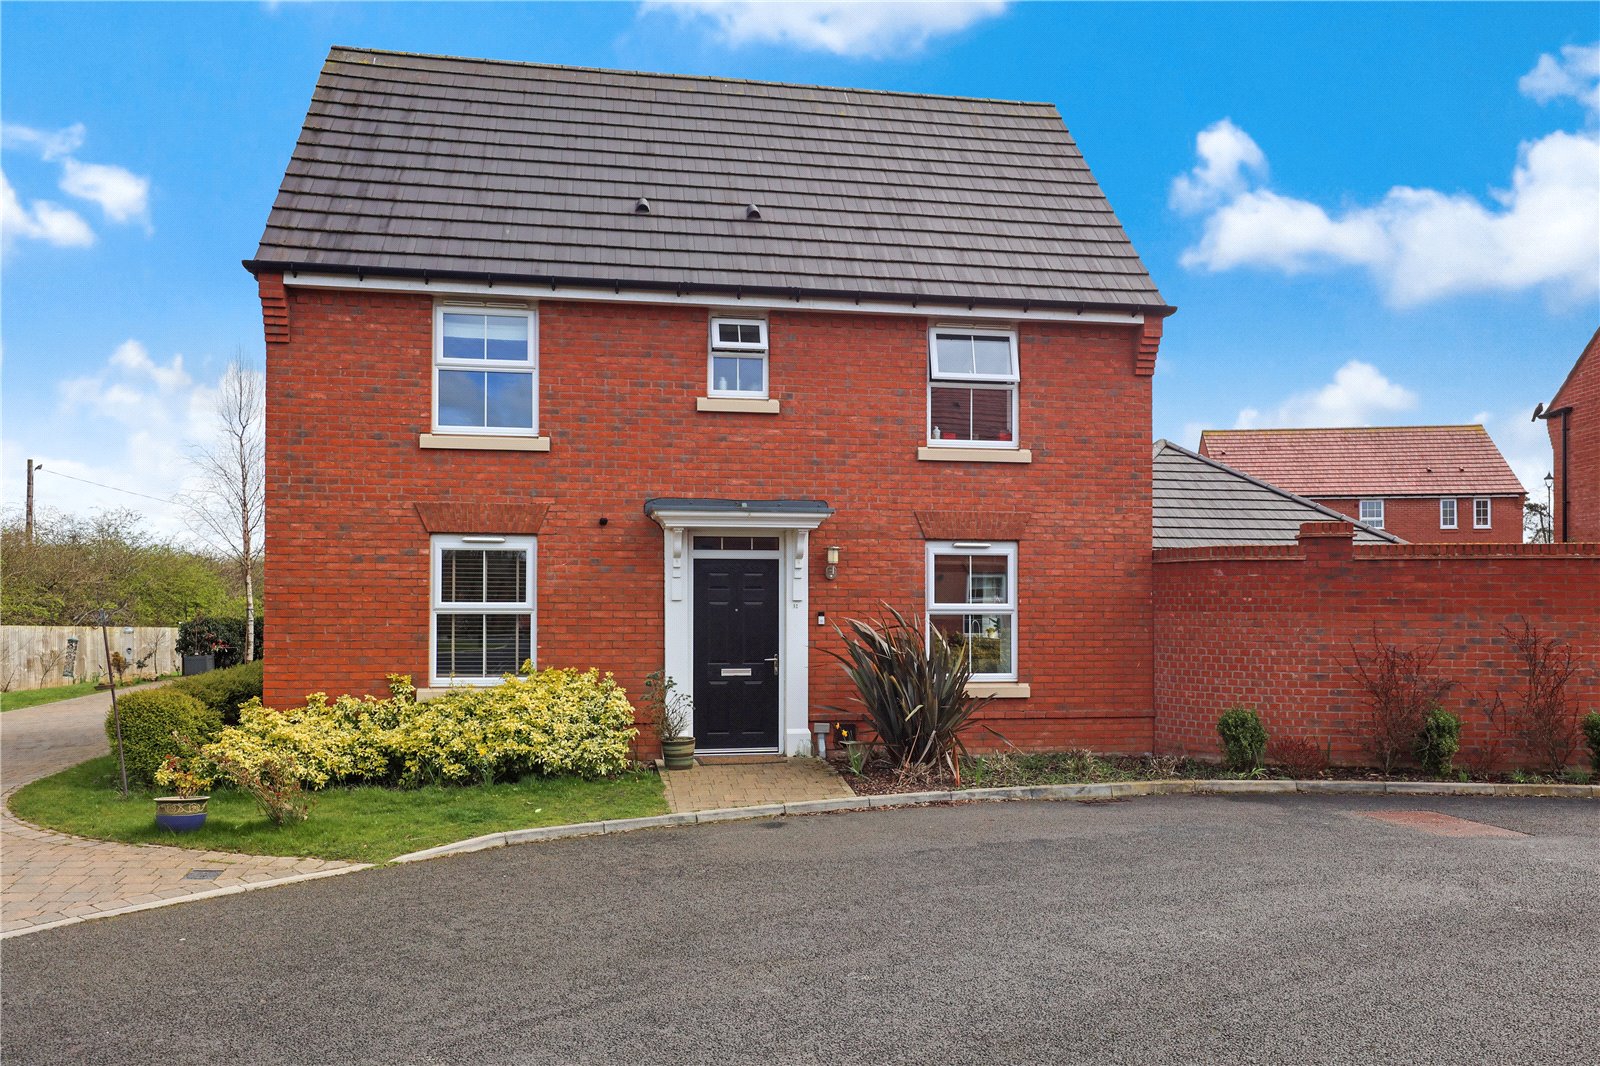 3 bed house for sale in Ayton Meadows, Nunthorpe  - Property Image 1